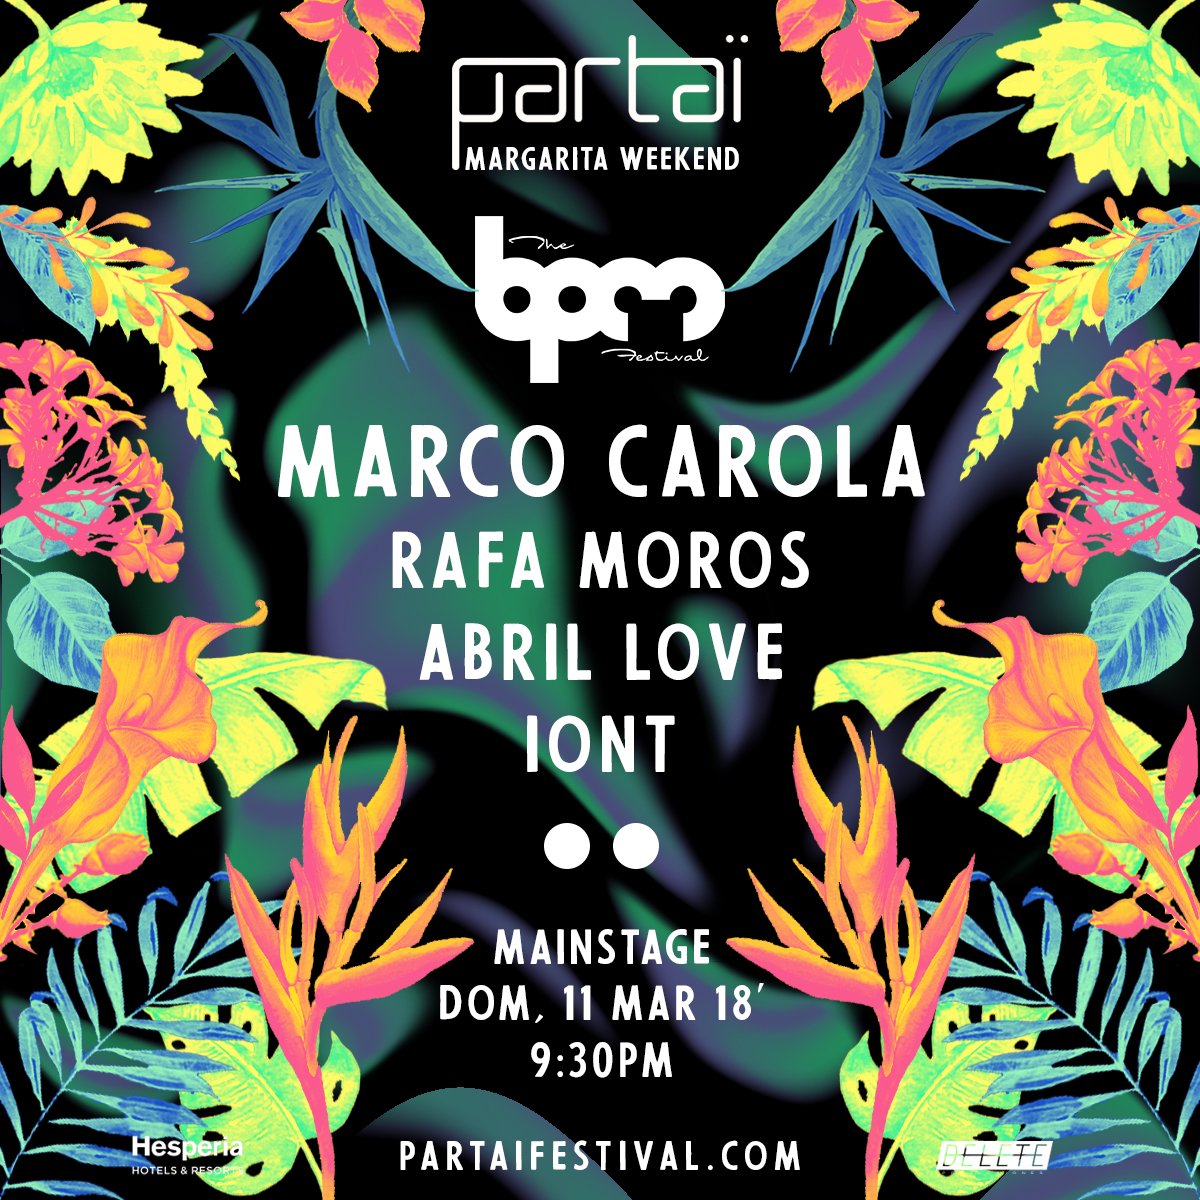 We’re excited to be hosting the main stage at #PartaiFestival in Venezuela on March 11 with our good friend & #BPMfamilia @MarcoCarola + more! ✈🇻🇪 Join us next Sunday on the dancefloor! 🎶🎉 For tickets 👉 bit.ly/PartaiFestival